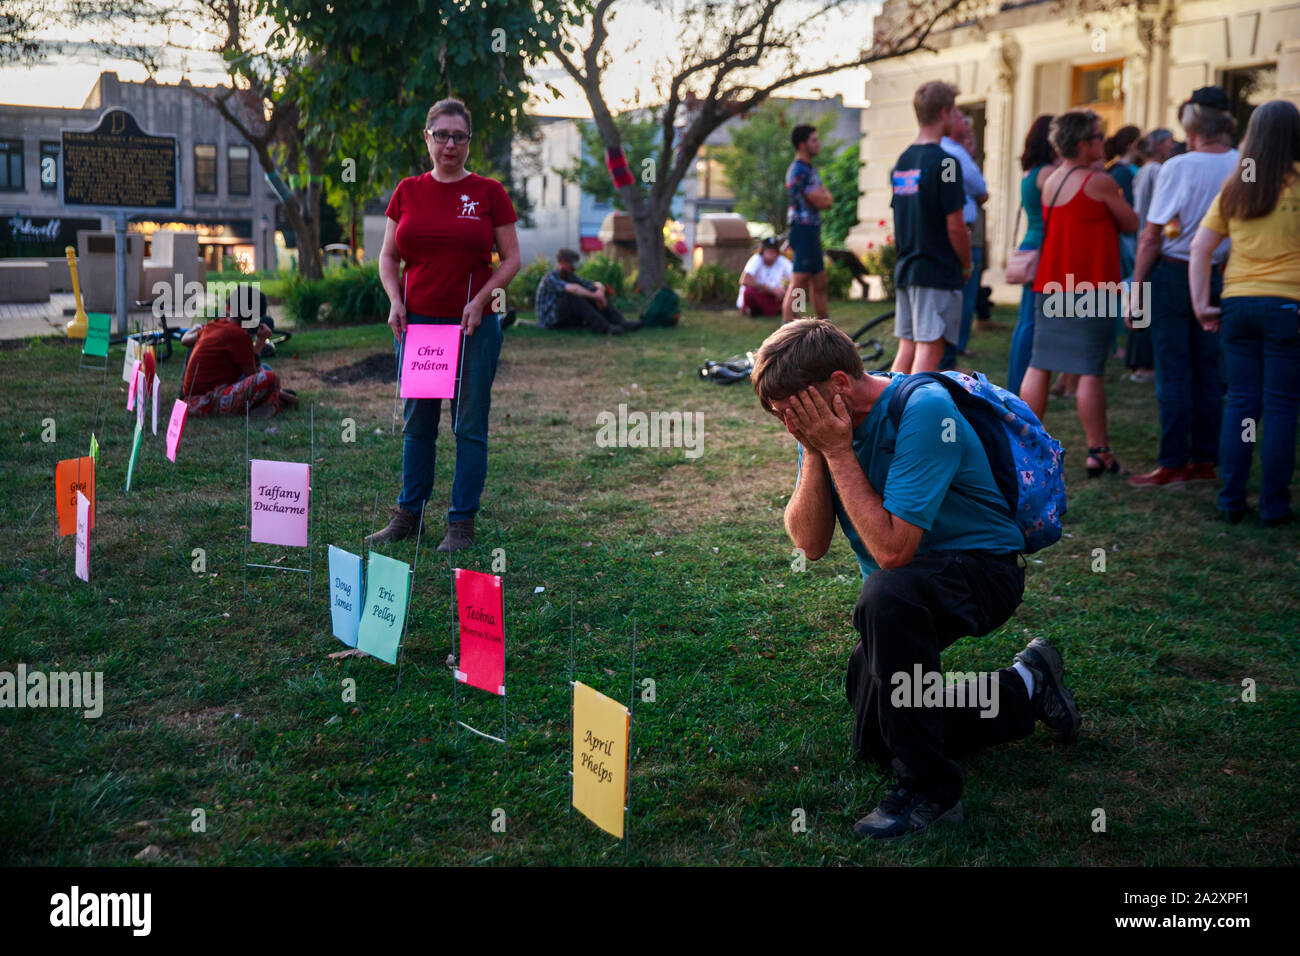 James Payne, who has been experiencing homelessness for two years, mourns the death of his fiancée April Phelps, who had also been experiencing homelessness, during the Homeless Memorial Vigil, Thursday, October 3, 2019 at the Monroe County Courthouse in Bloomington, Ind. 'I was with her when she died,' said Payne. During the vigil the names of community members who died while experiencing homelessness were read, and their names were placed in memorial. The names read are, Shelly Arthur, Craig Bowles, Billy Brown, Steven Brown, Bruce Bundy, Greg Cook, Alvin Davis, Taffany Ducharme, Coy Fulford Stock Photo